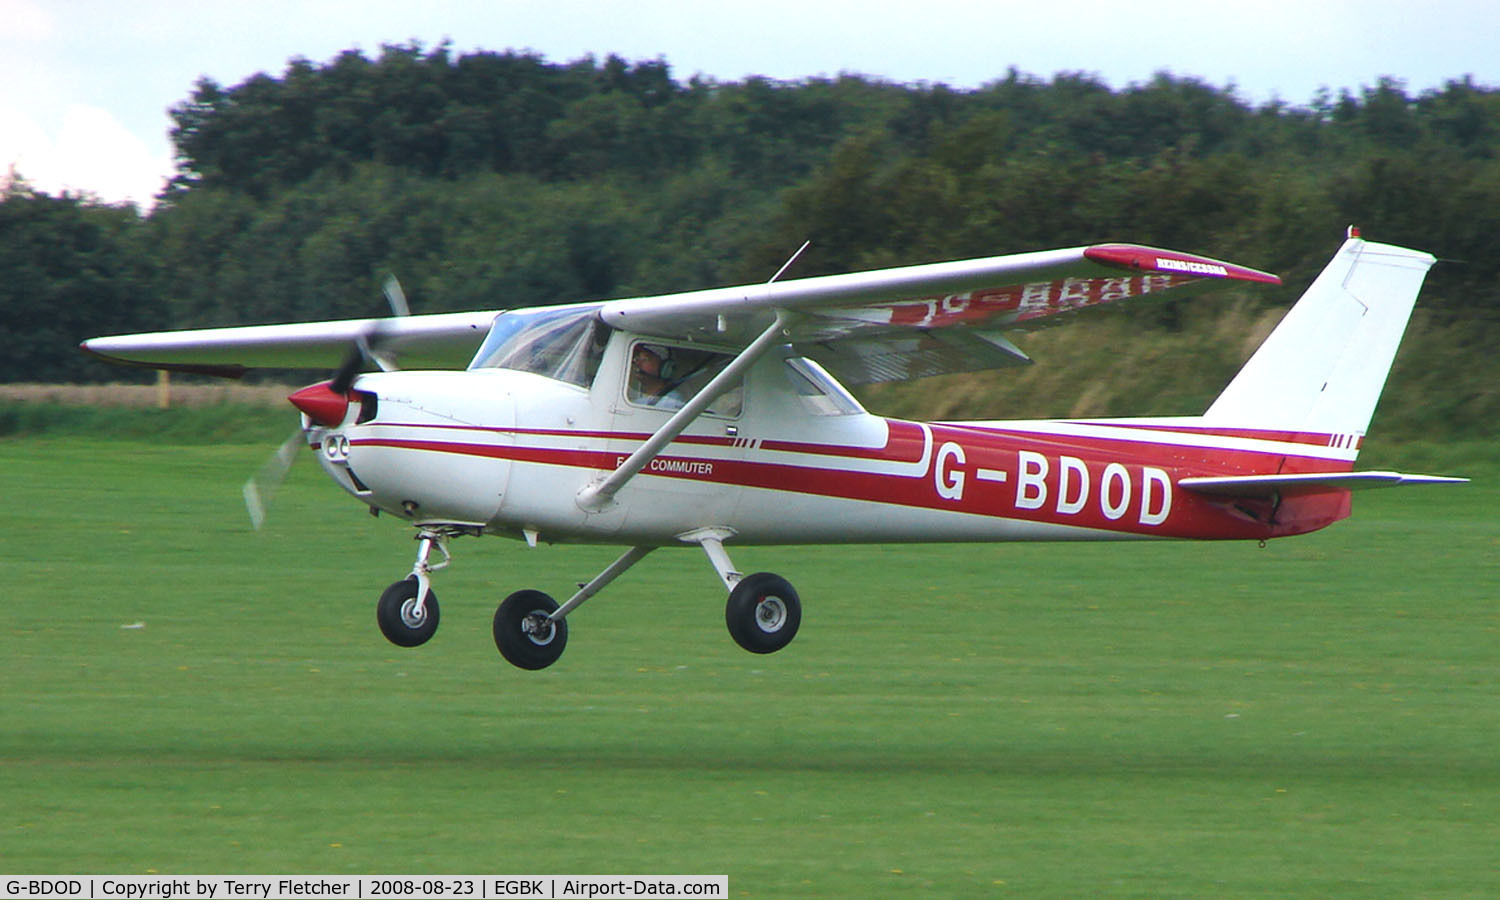 G-BDOD, 1975 Reims F150M C/N 1266, Visitor to Sywell on 2008 Ragwing Fly-in day